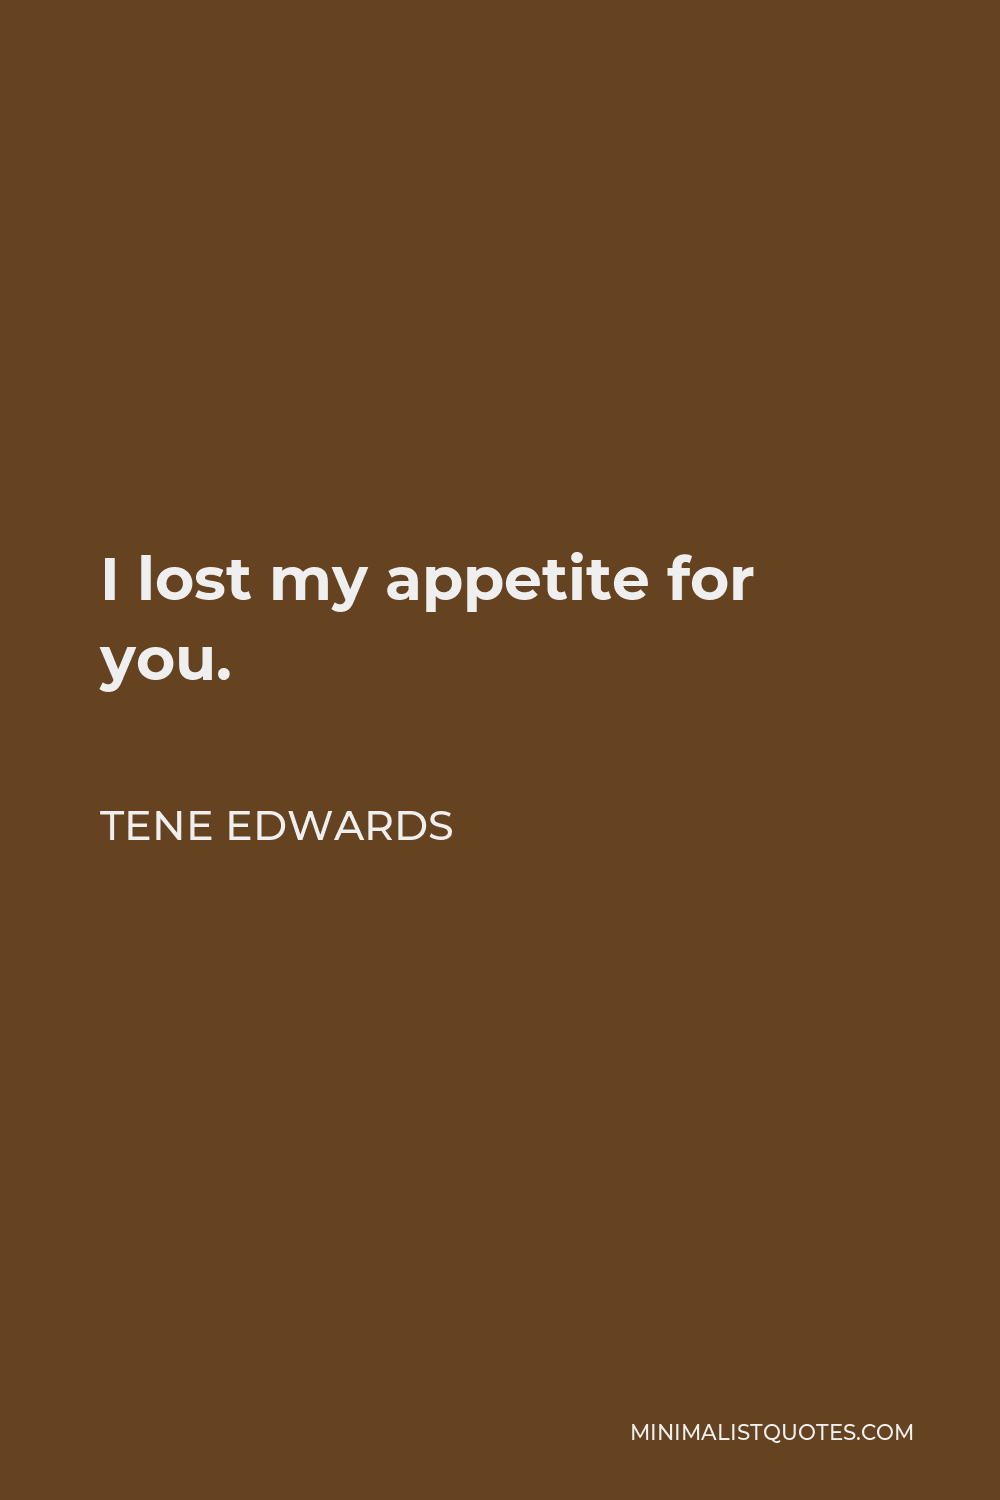 Tene Edwards Quote - I lost my appetite for you.